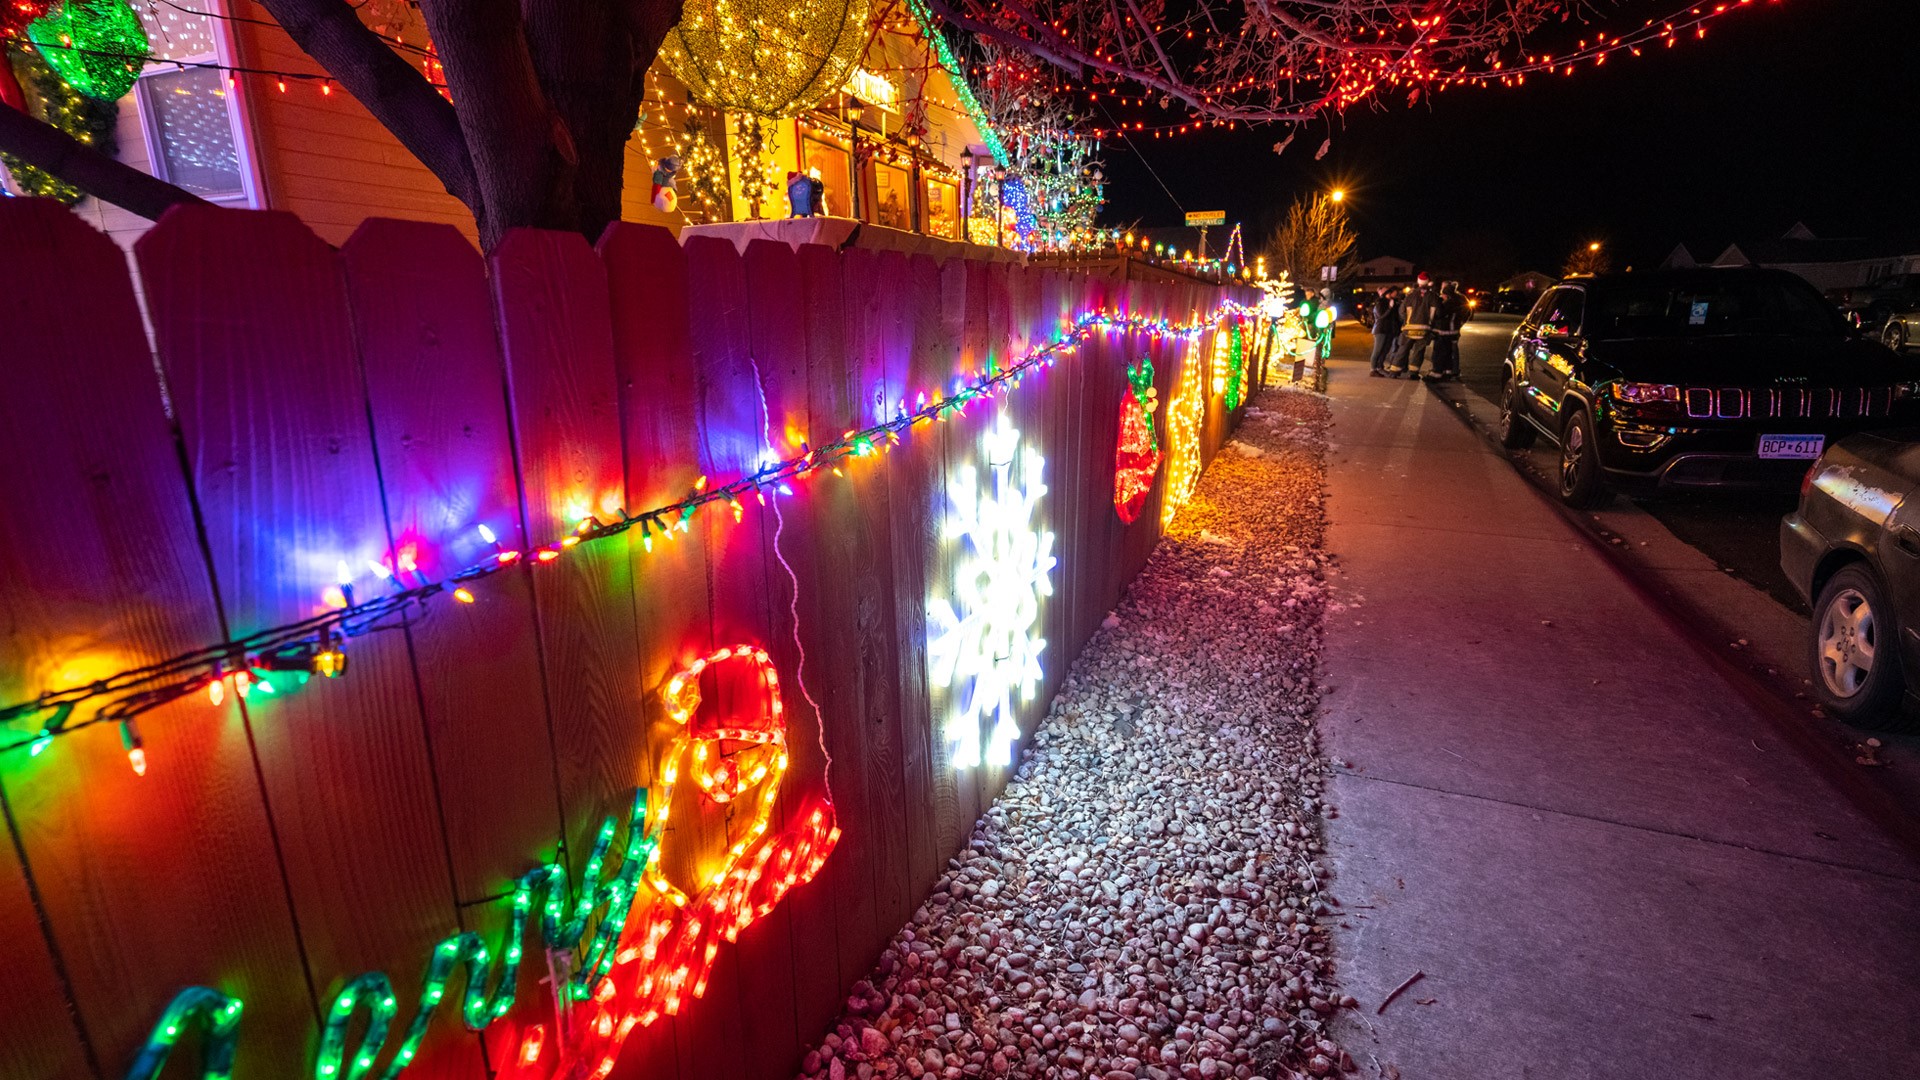 Where to find the best Christmas lights in Denver and Colorado; an